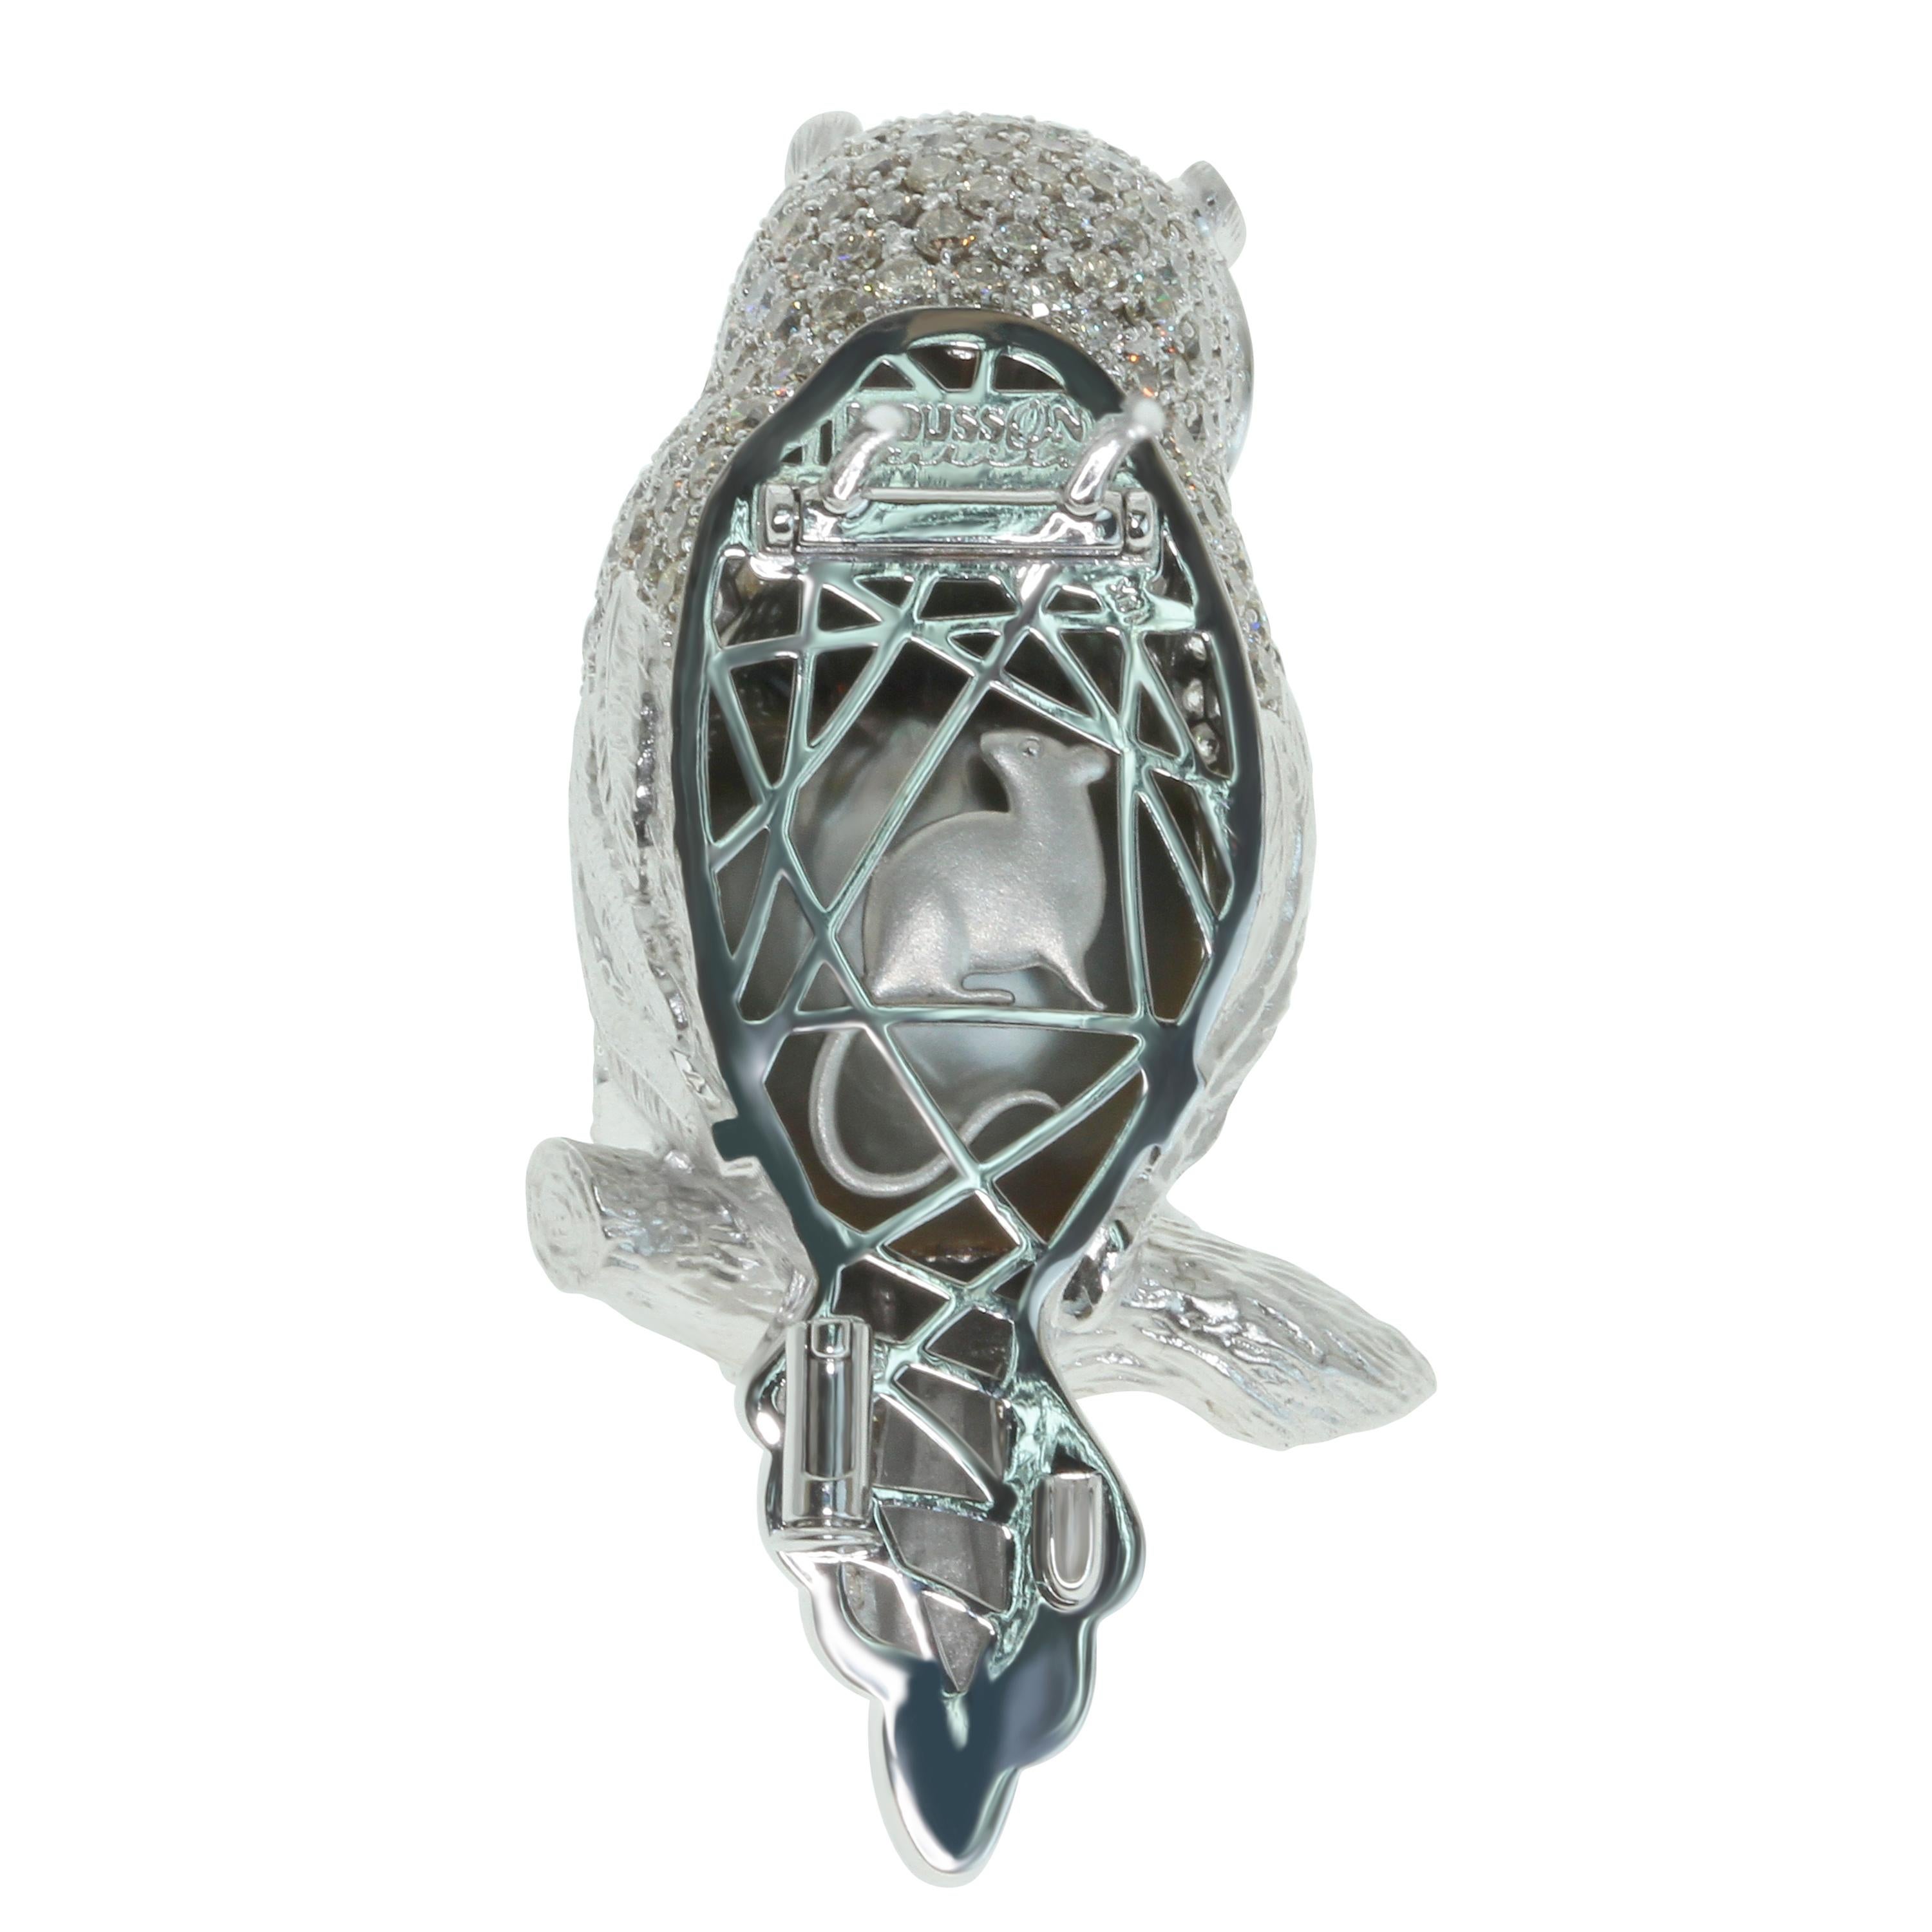 18 Karat White Gold, Diamond 1.71 carat, Brown Diamond 1.58 carat, Thaiti Pearl 32.54 ct Owl brooch. Two pin system for the perfect wearing, it will never fell down. All feather are engraved by hand. High detailing. On the back part small mouse, as